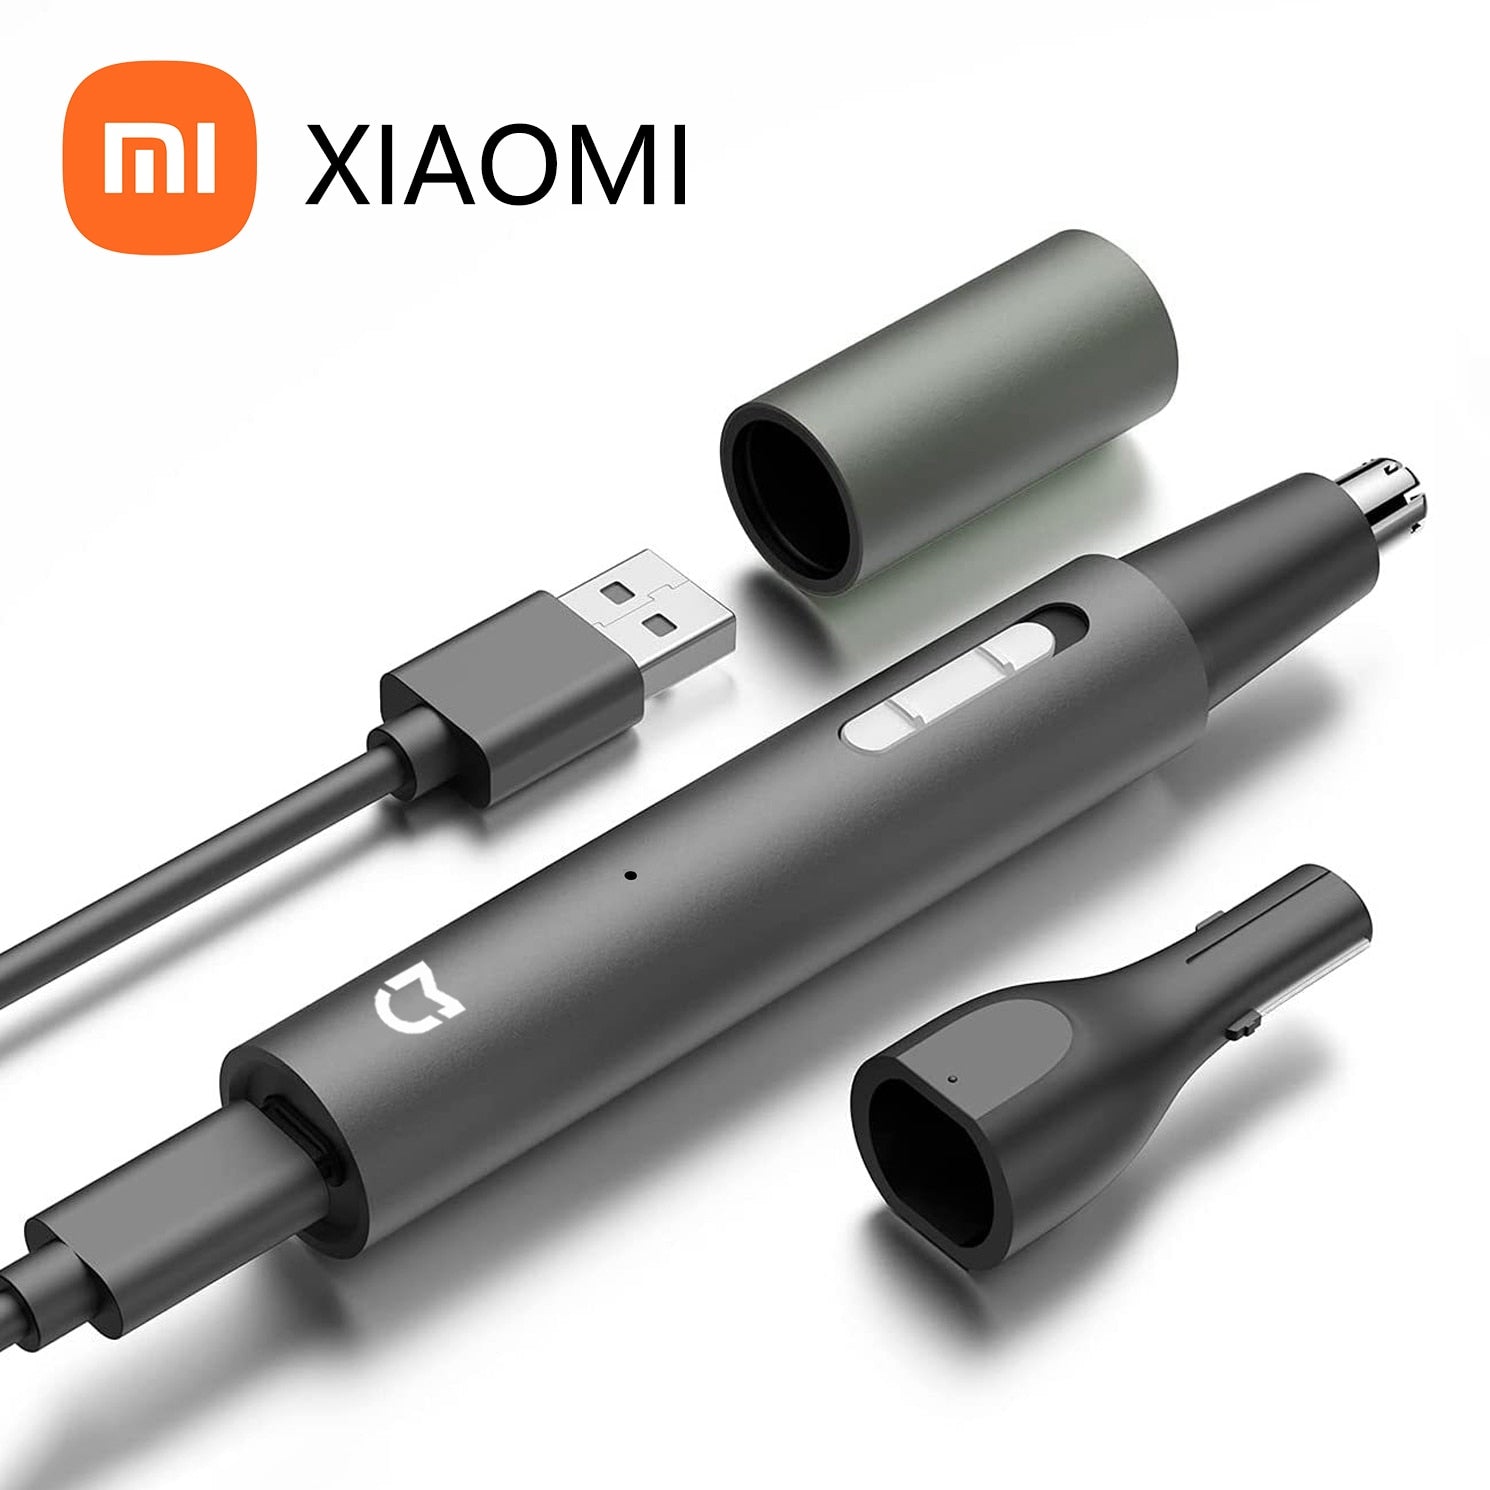 Xiaomi Mijia Electric Nose Ear Hair Trimmer for Men Painless Rechargeable Sideburns Eyebrows Beard 3 in 1 Hair Clipper Shaver